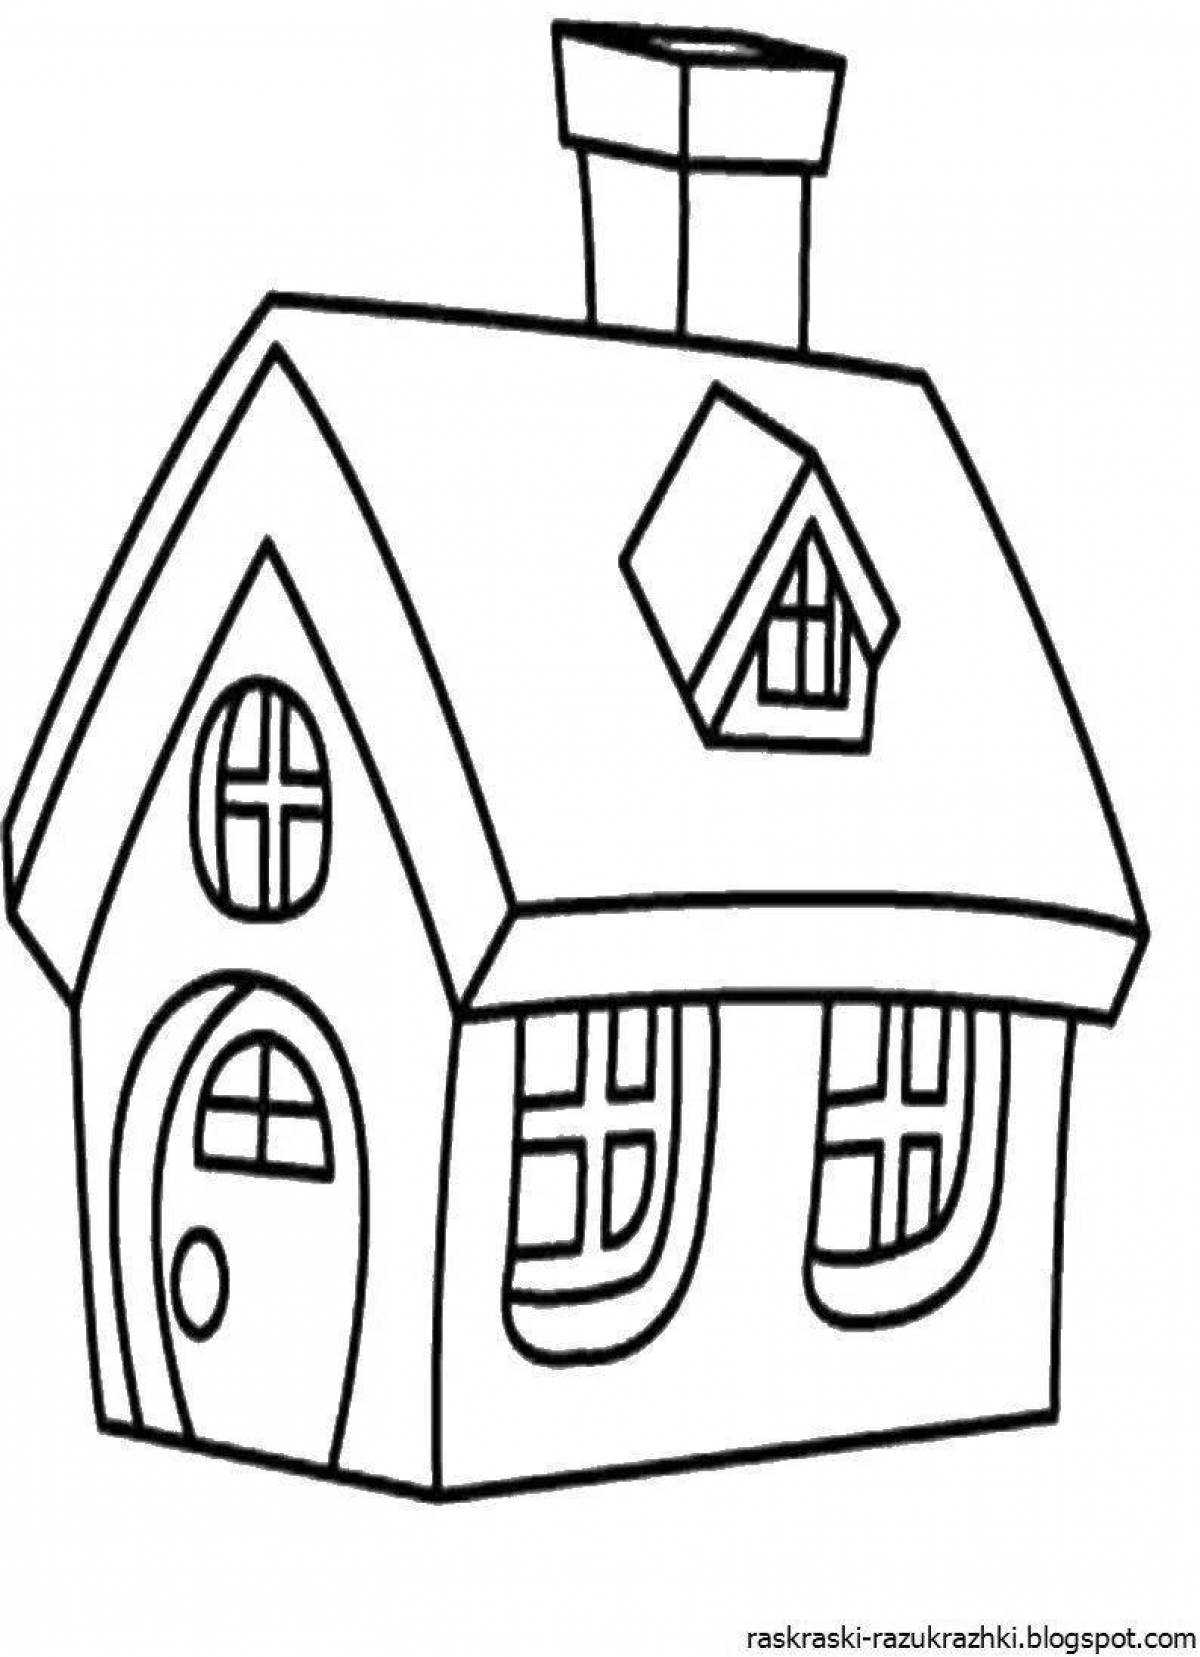 Adorable house coloring for kids